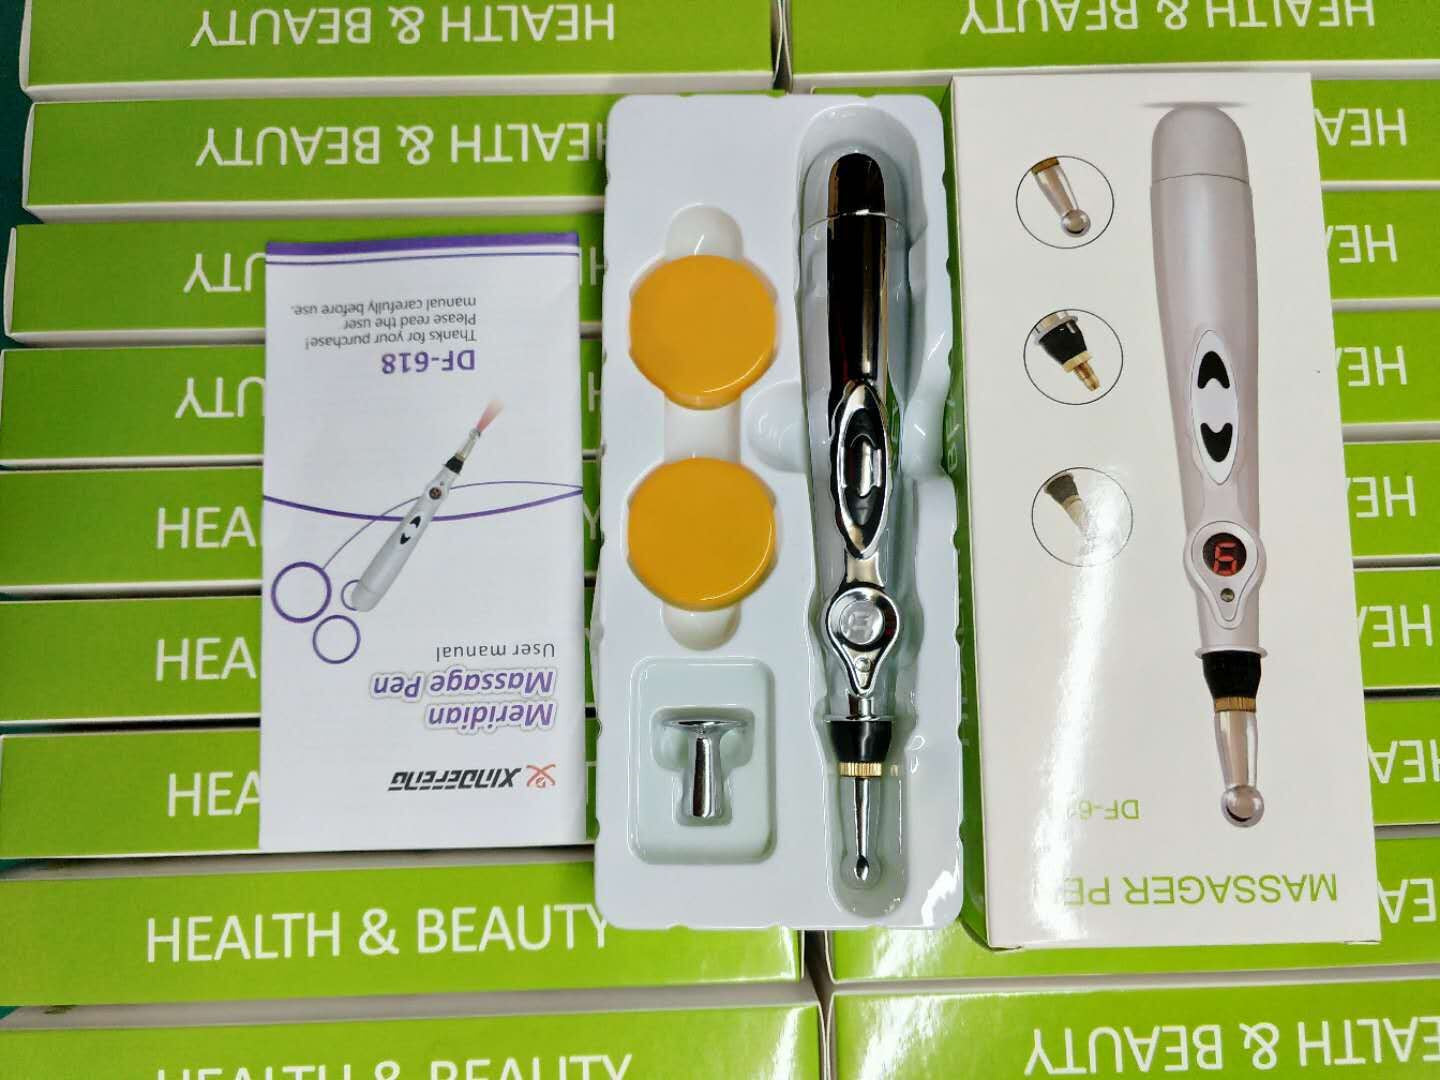 Health care USB rechargeable body massage therapy meridian energy acupuncture pen